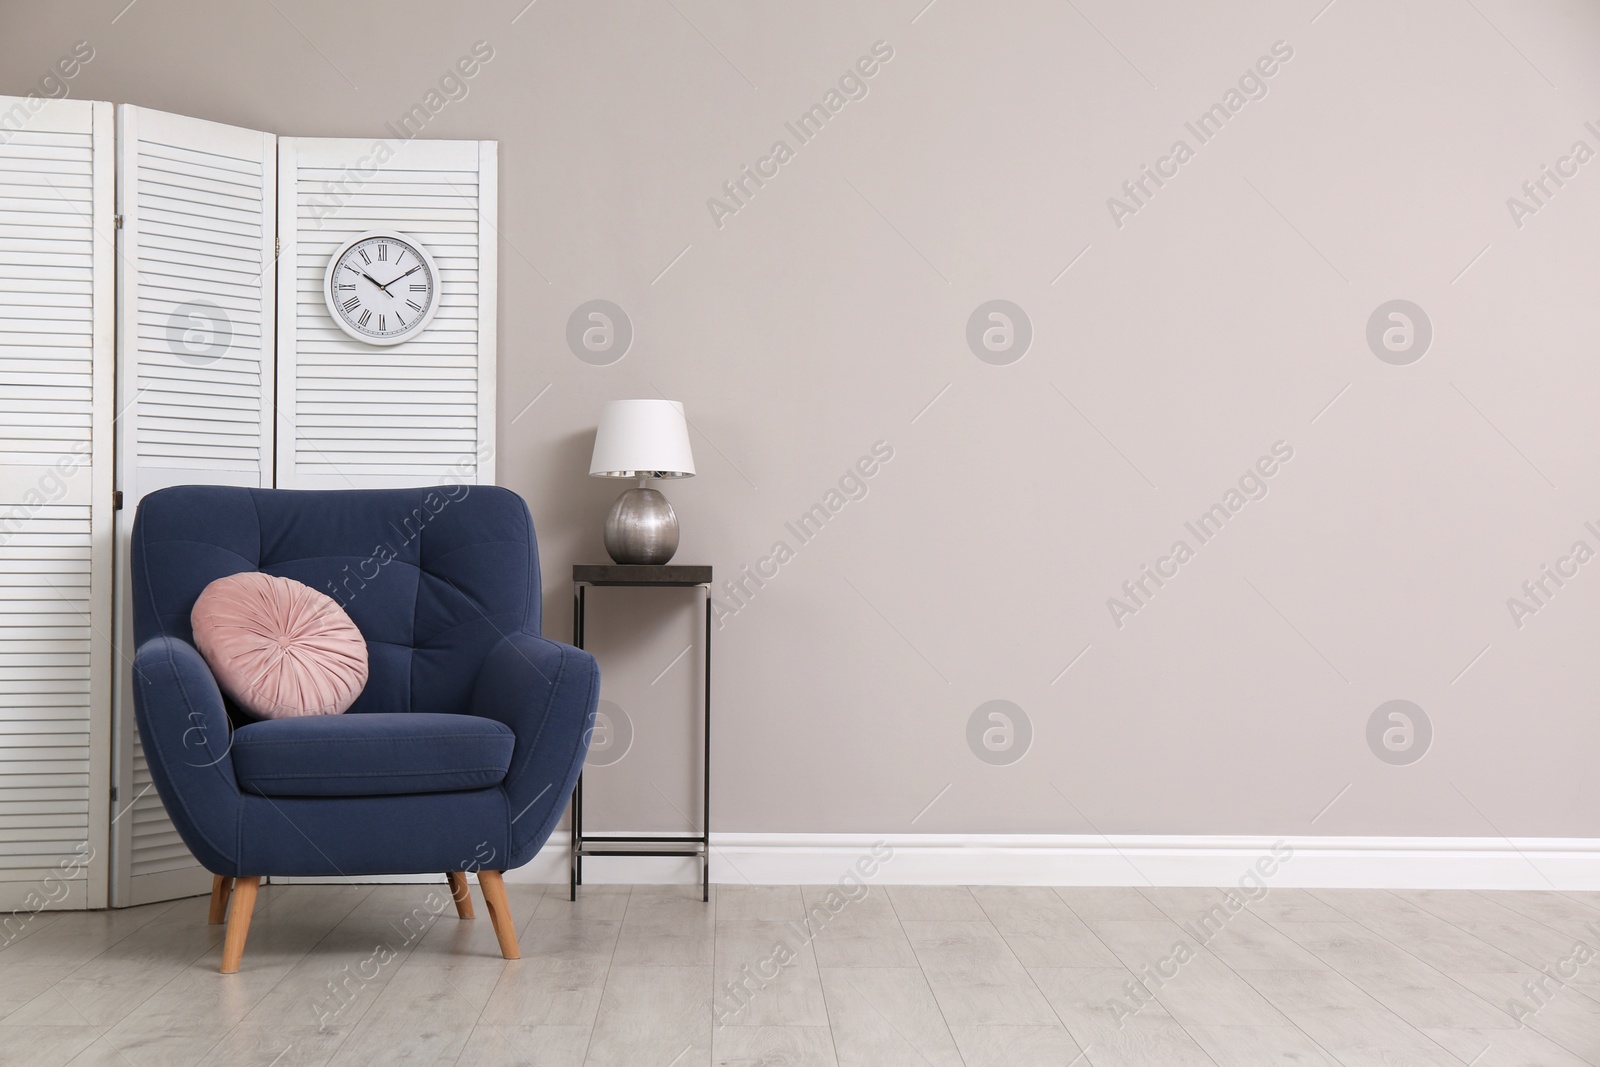 Photo of Comfortable armchair and decor near beige wall. Space for text